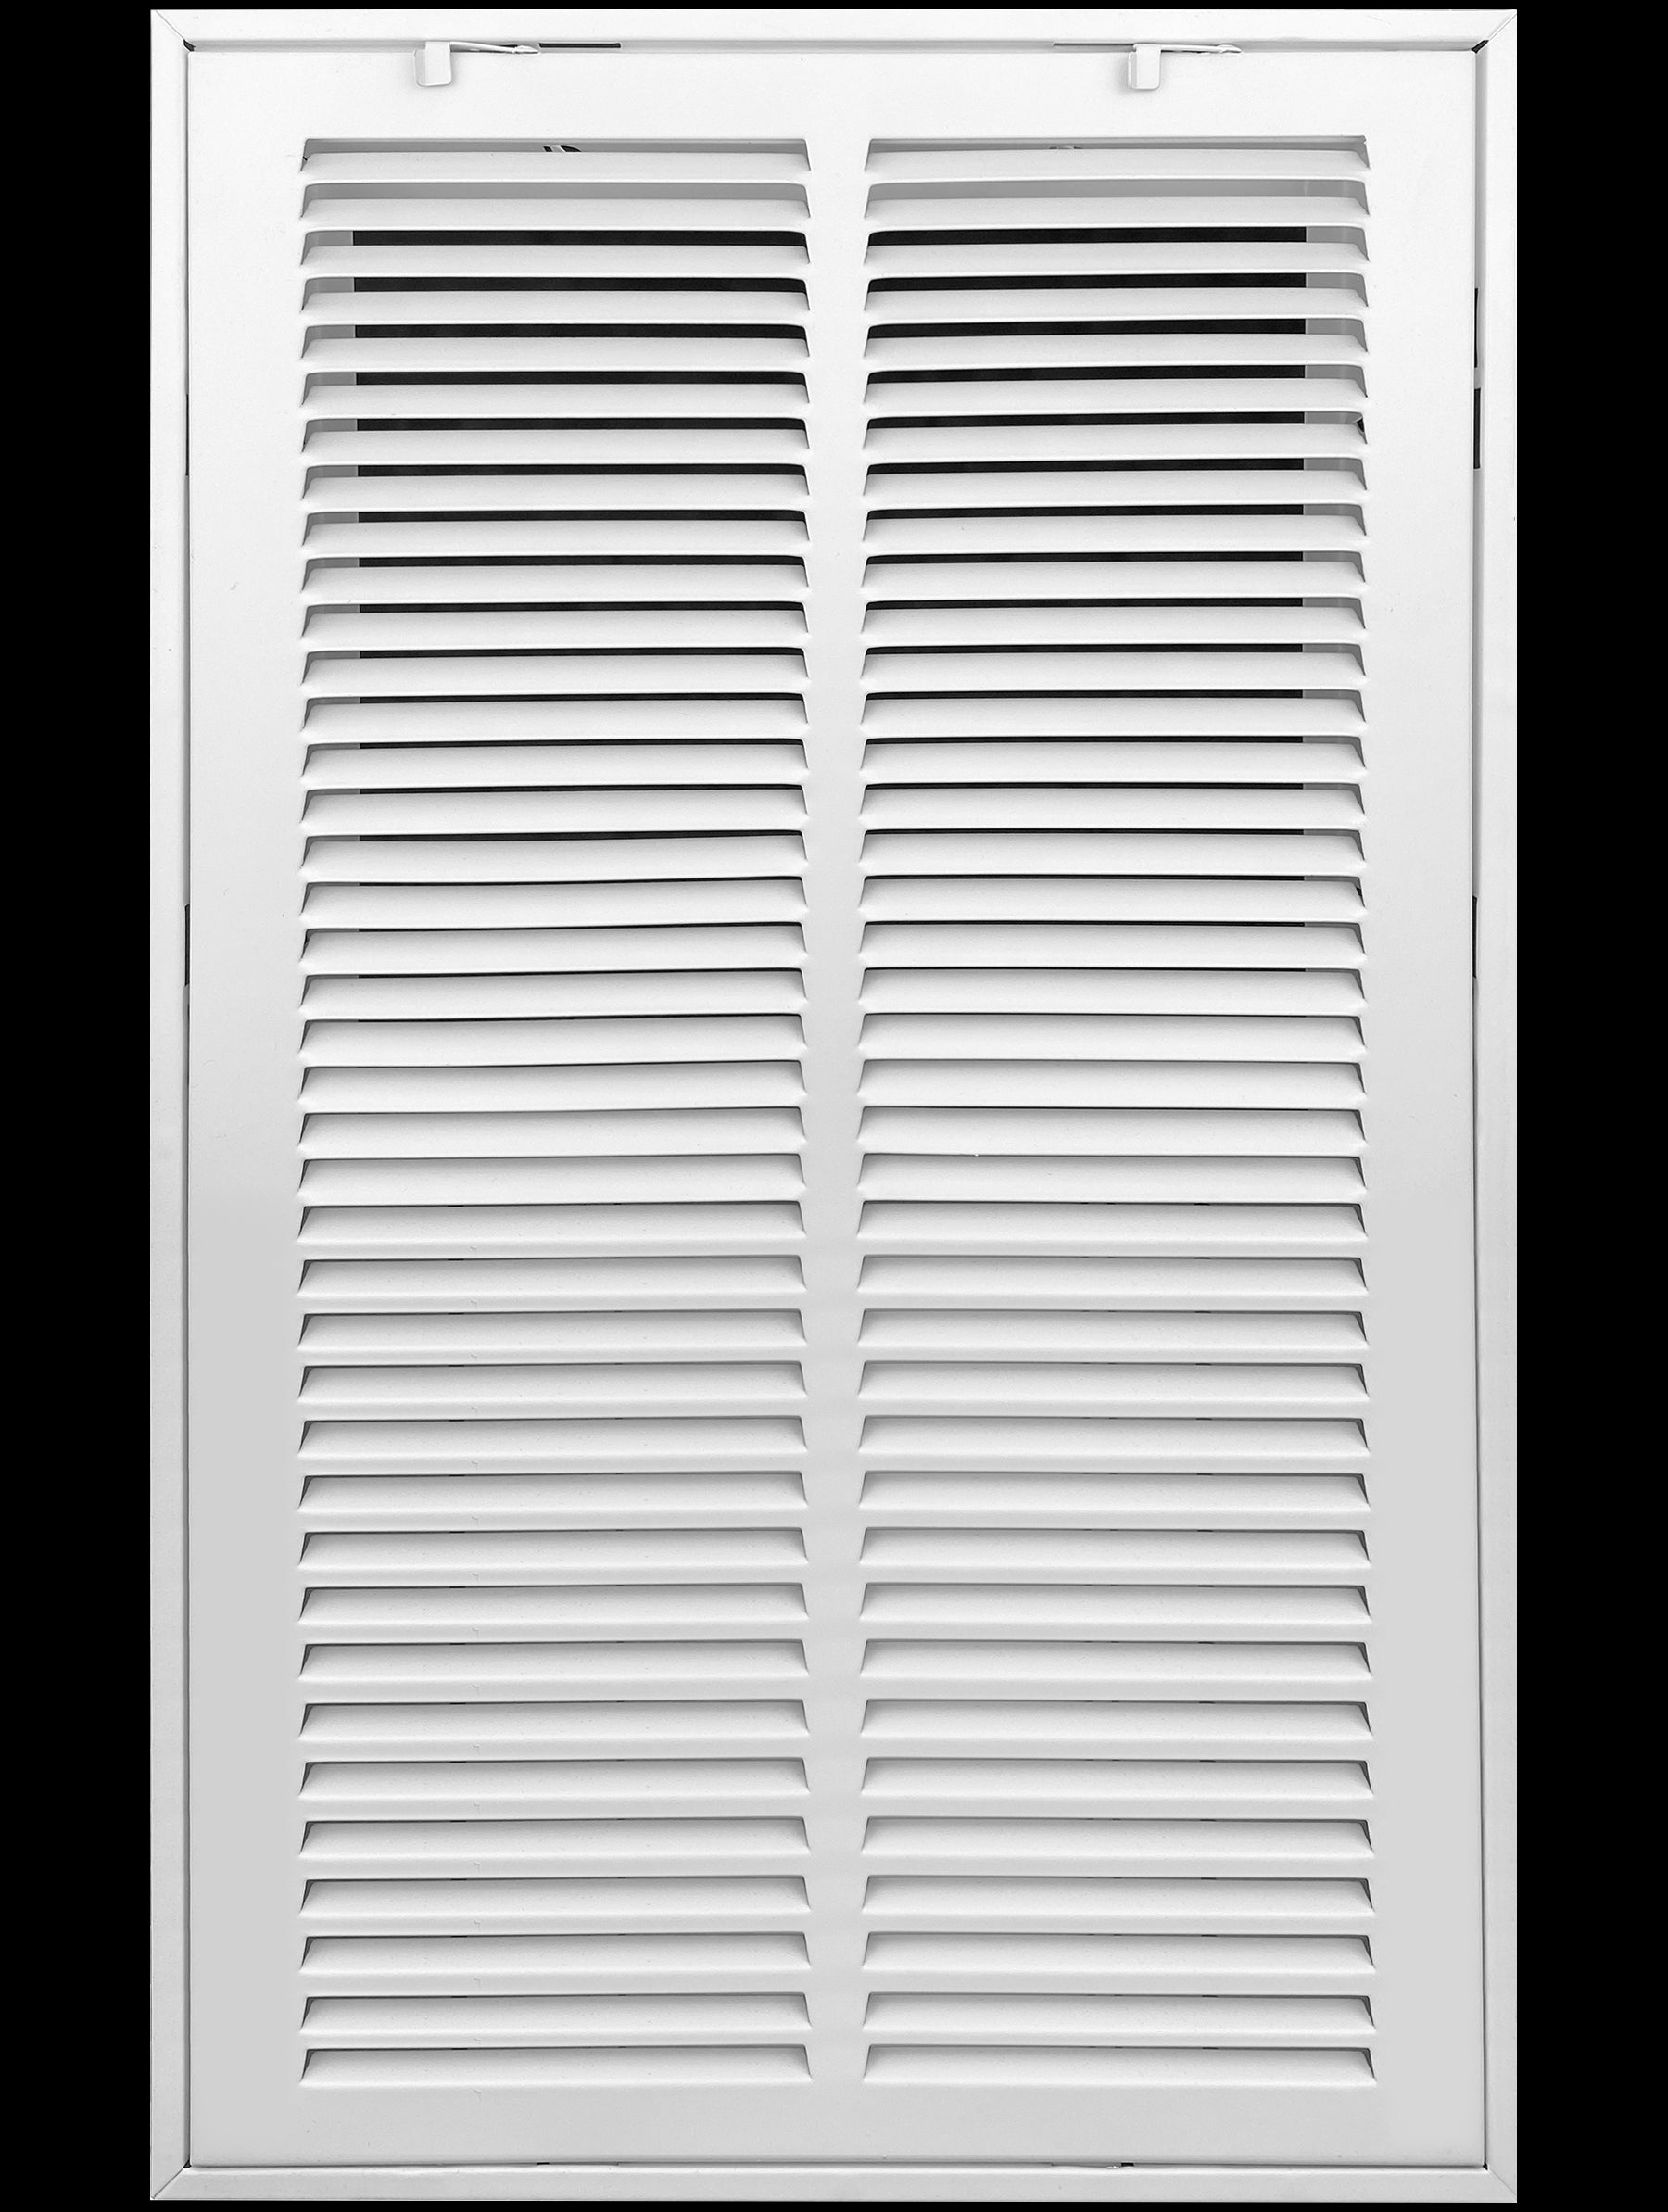 airgrilles 14" x 24" duct opening  -  steel return air filter grille  - fixed hinged -  for sidewall and ceiling hnd-fx-1rafg-wh-14x24 038775650632 - 1